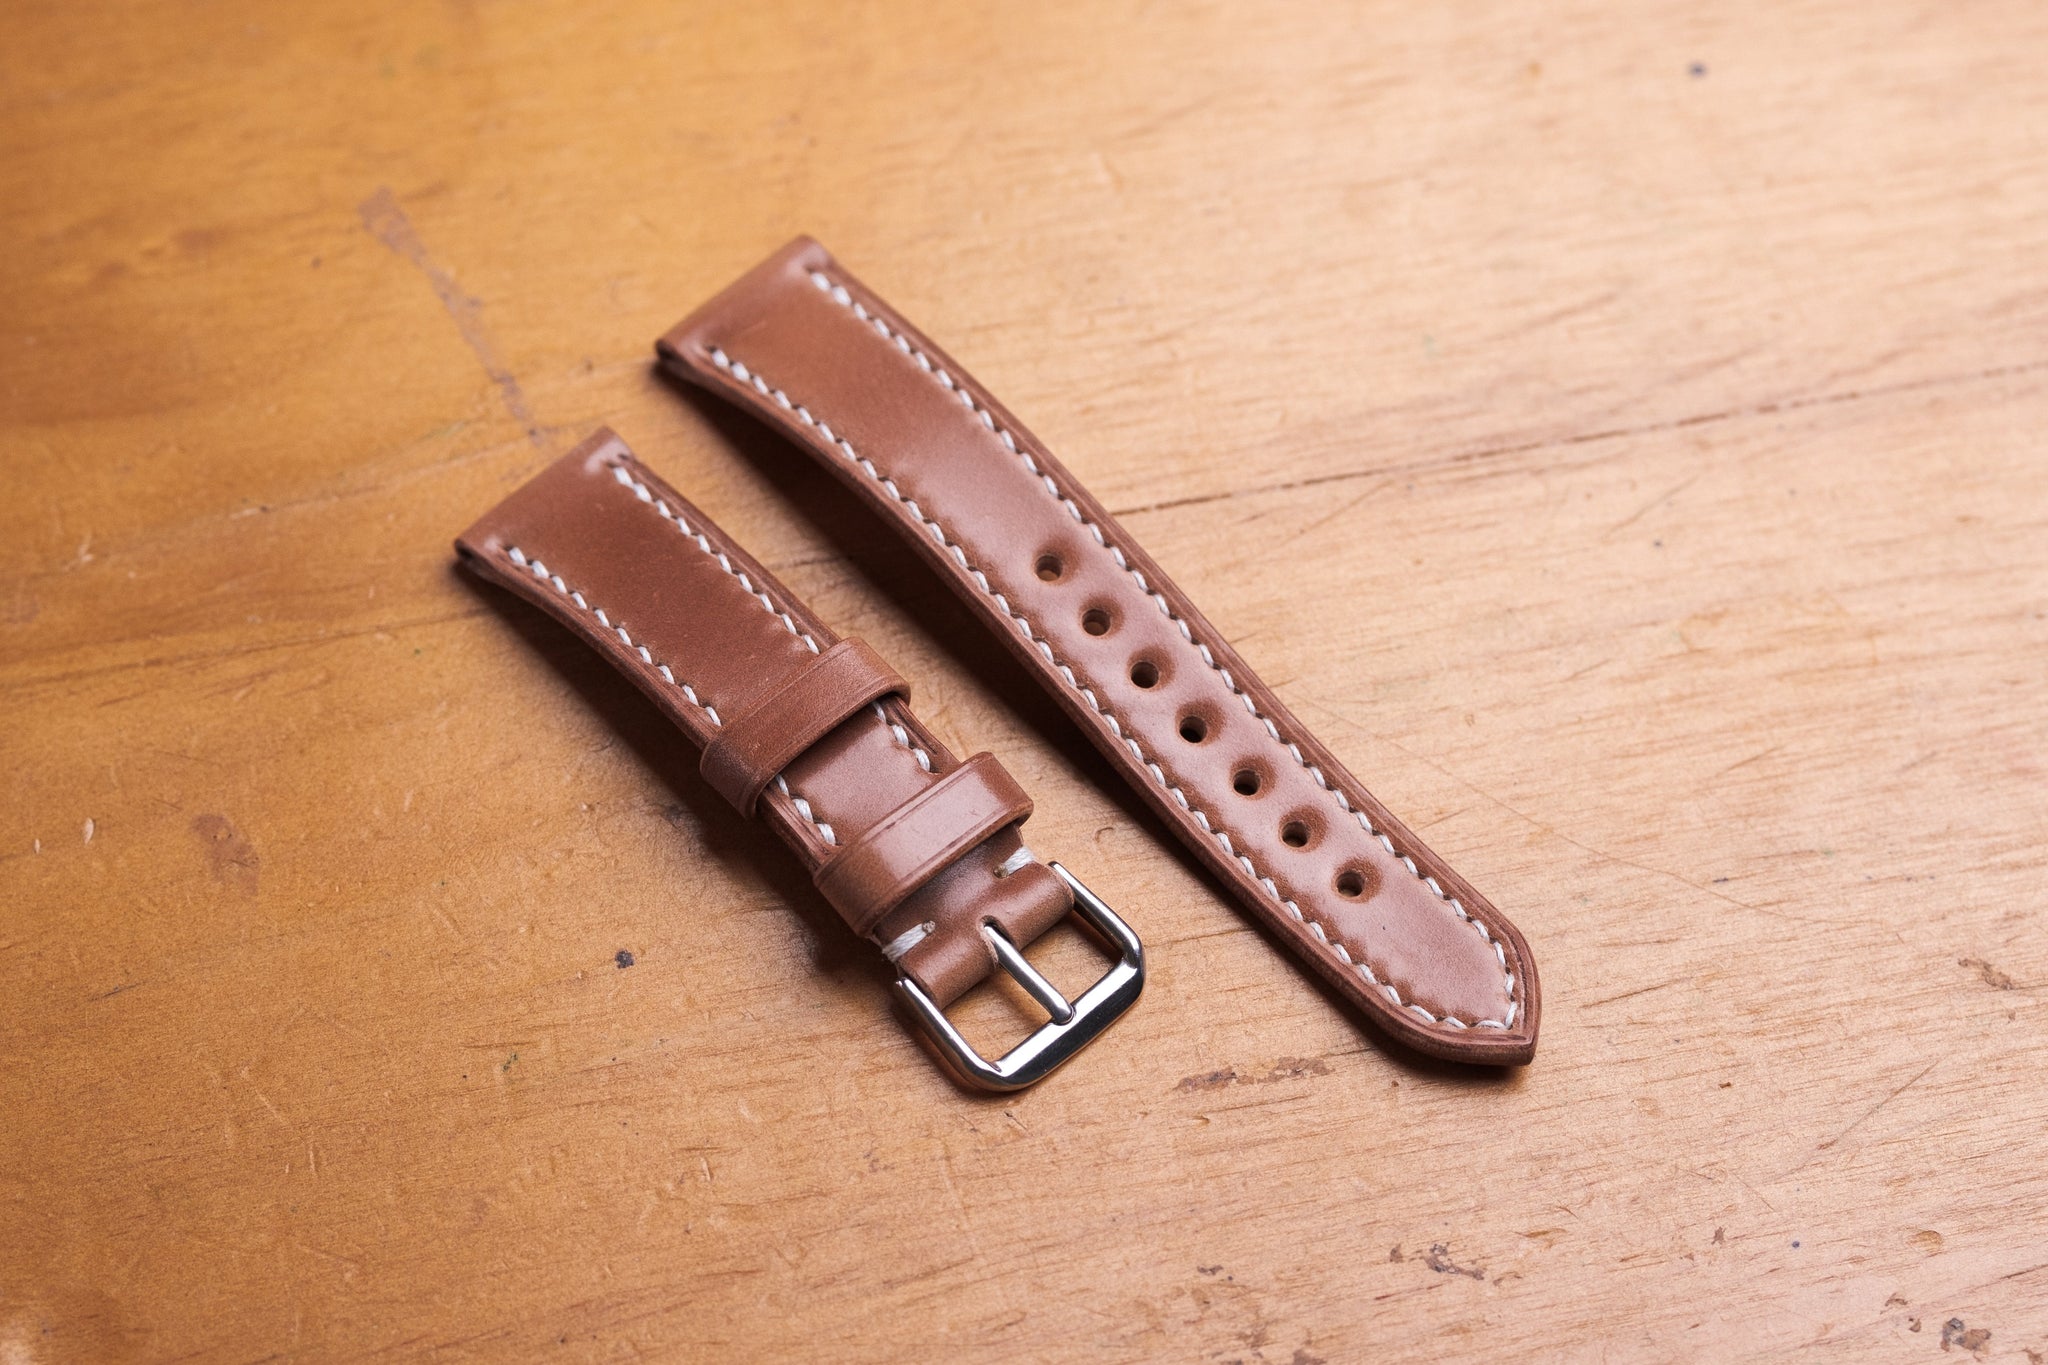 Shell Cordovan Vs. Horween Chromexcel - What's the Difference?